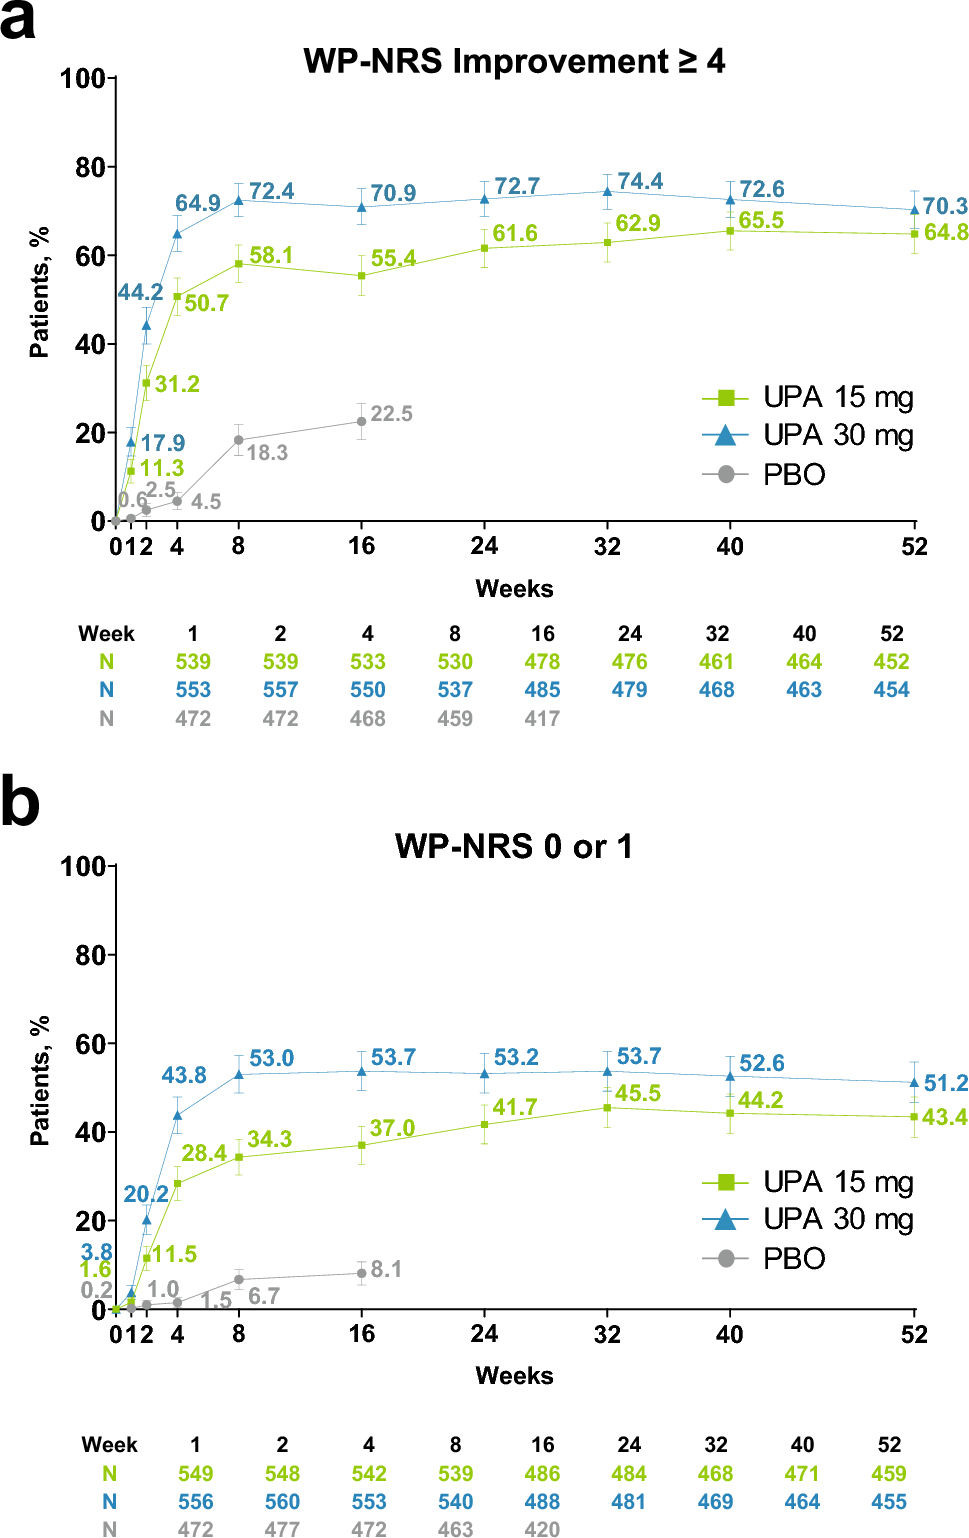 Early and Sustained Improvements in Symptoms and Quality of Life with Upadacitinib in Adults and Adolescents with Moderate-to-Severe Atopic Dermatitis: 52-Week Results from Two Phase III Randomized Clinical Trials (Measure Up 1 and Measure Up 2)